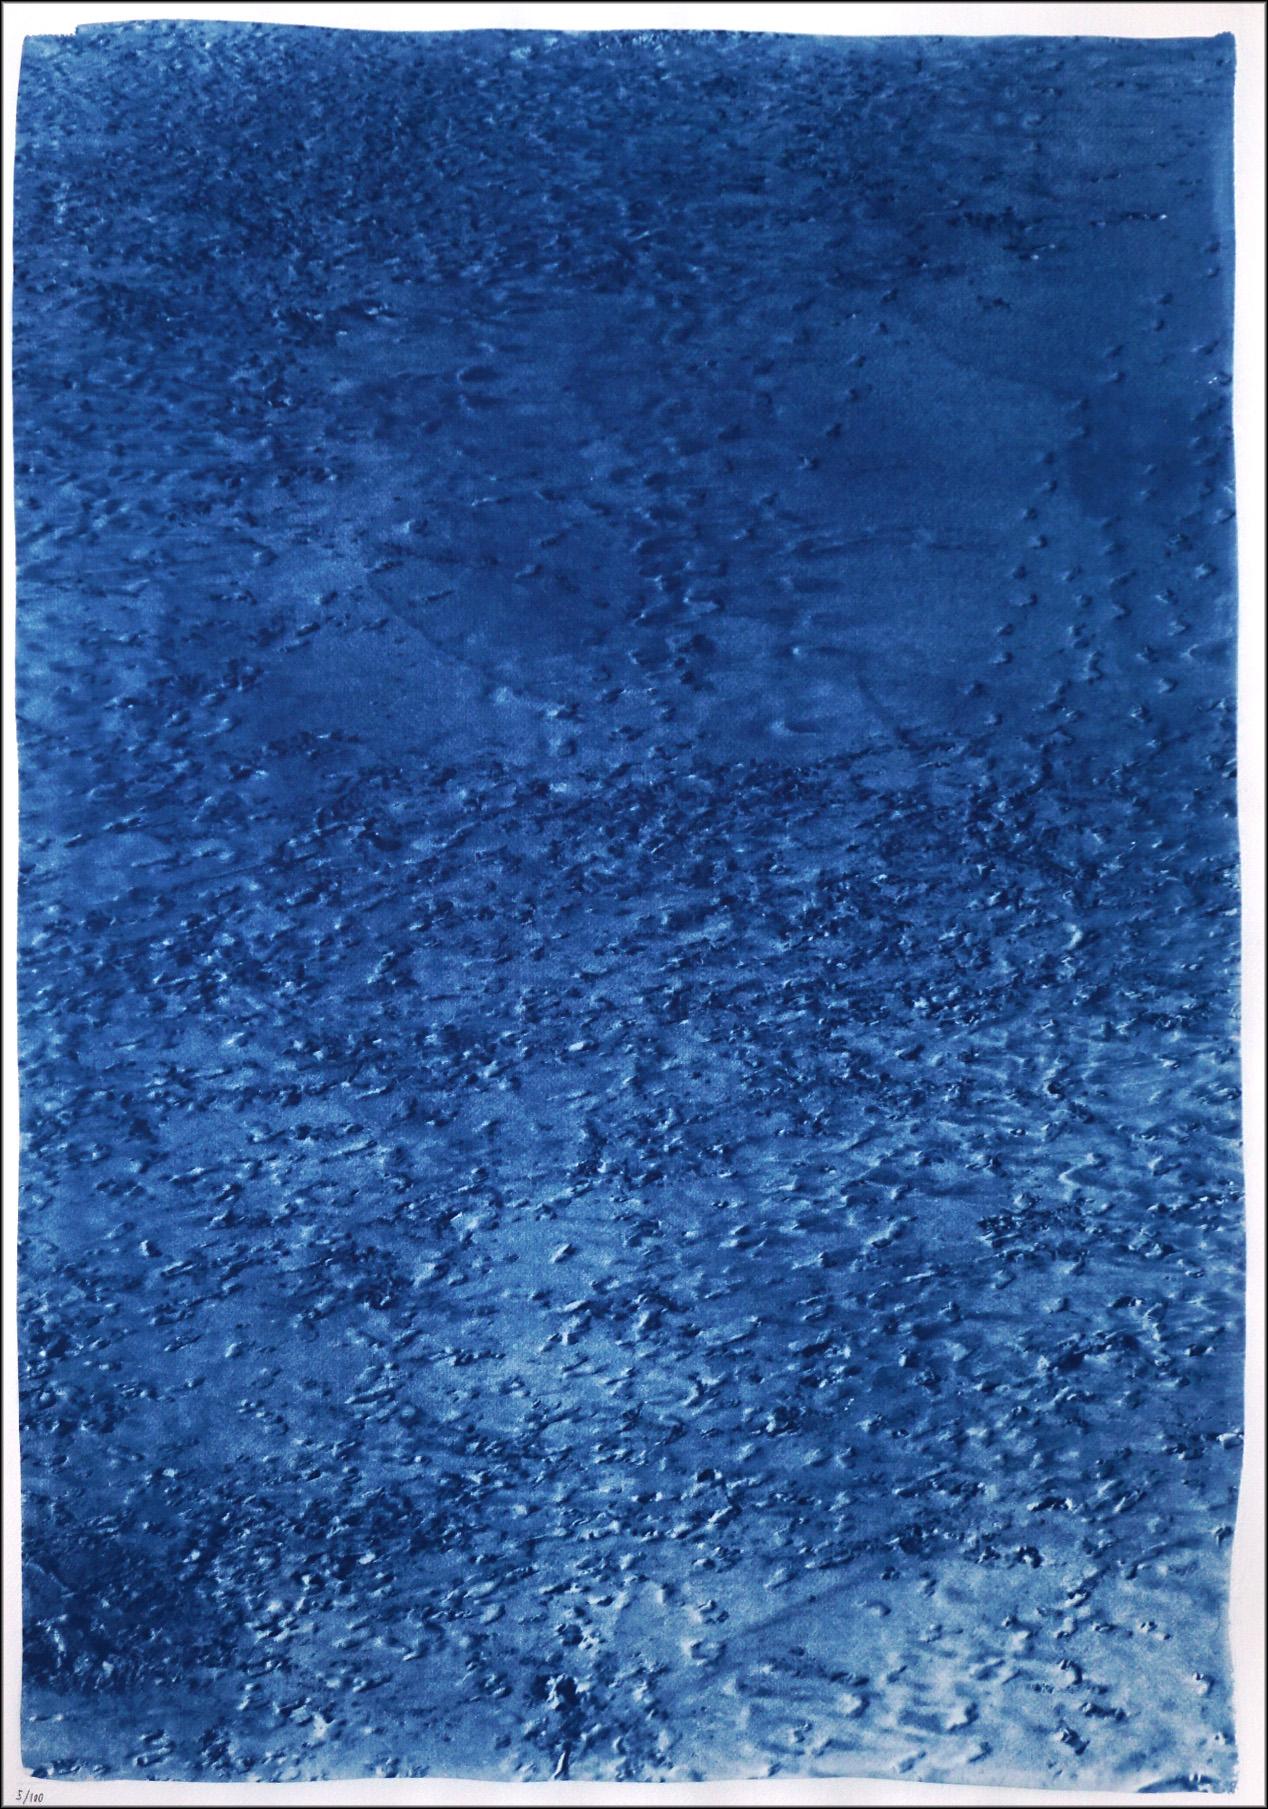 This is an exclusive handprinted limited edition cyanotype.

This beautiful triptych shows a smooth wave peacefully reaching the shore in Costa Rica.

Details:
+ Title: Calm Costa Rica Shore
+ Year: 2023
+ Edition Size: 100
+ Stamped and Certificate